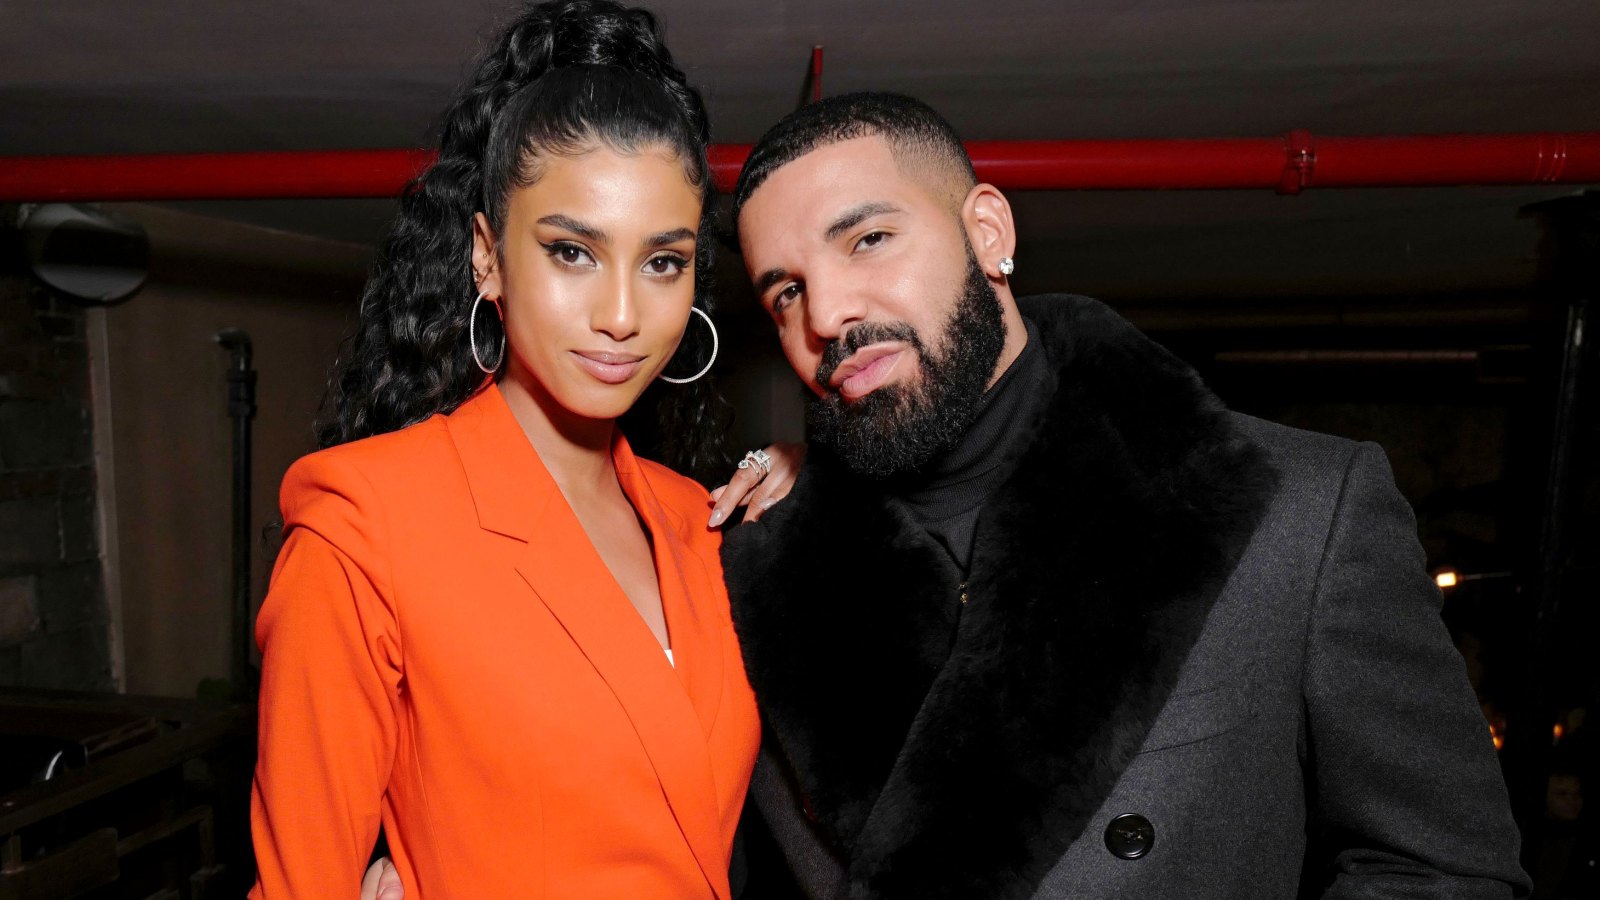 Drake and Imaan Hammam Look 'So Cute Together' at New York Fashion Week Dinner